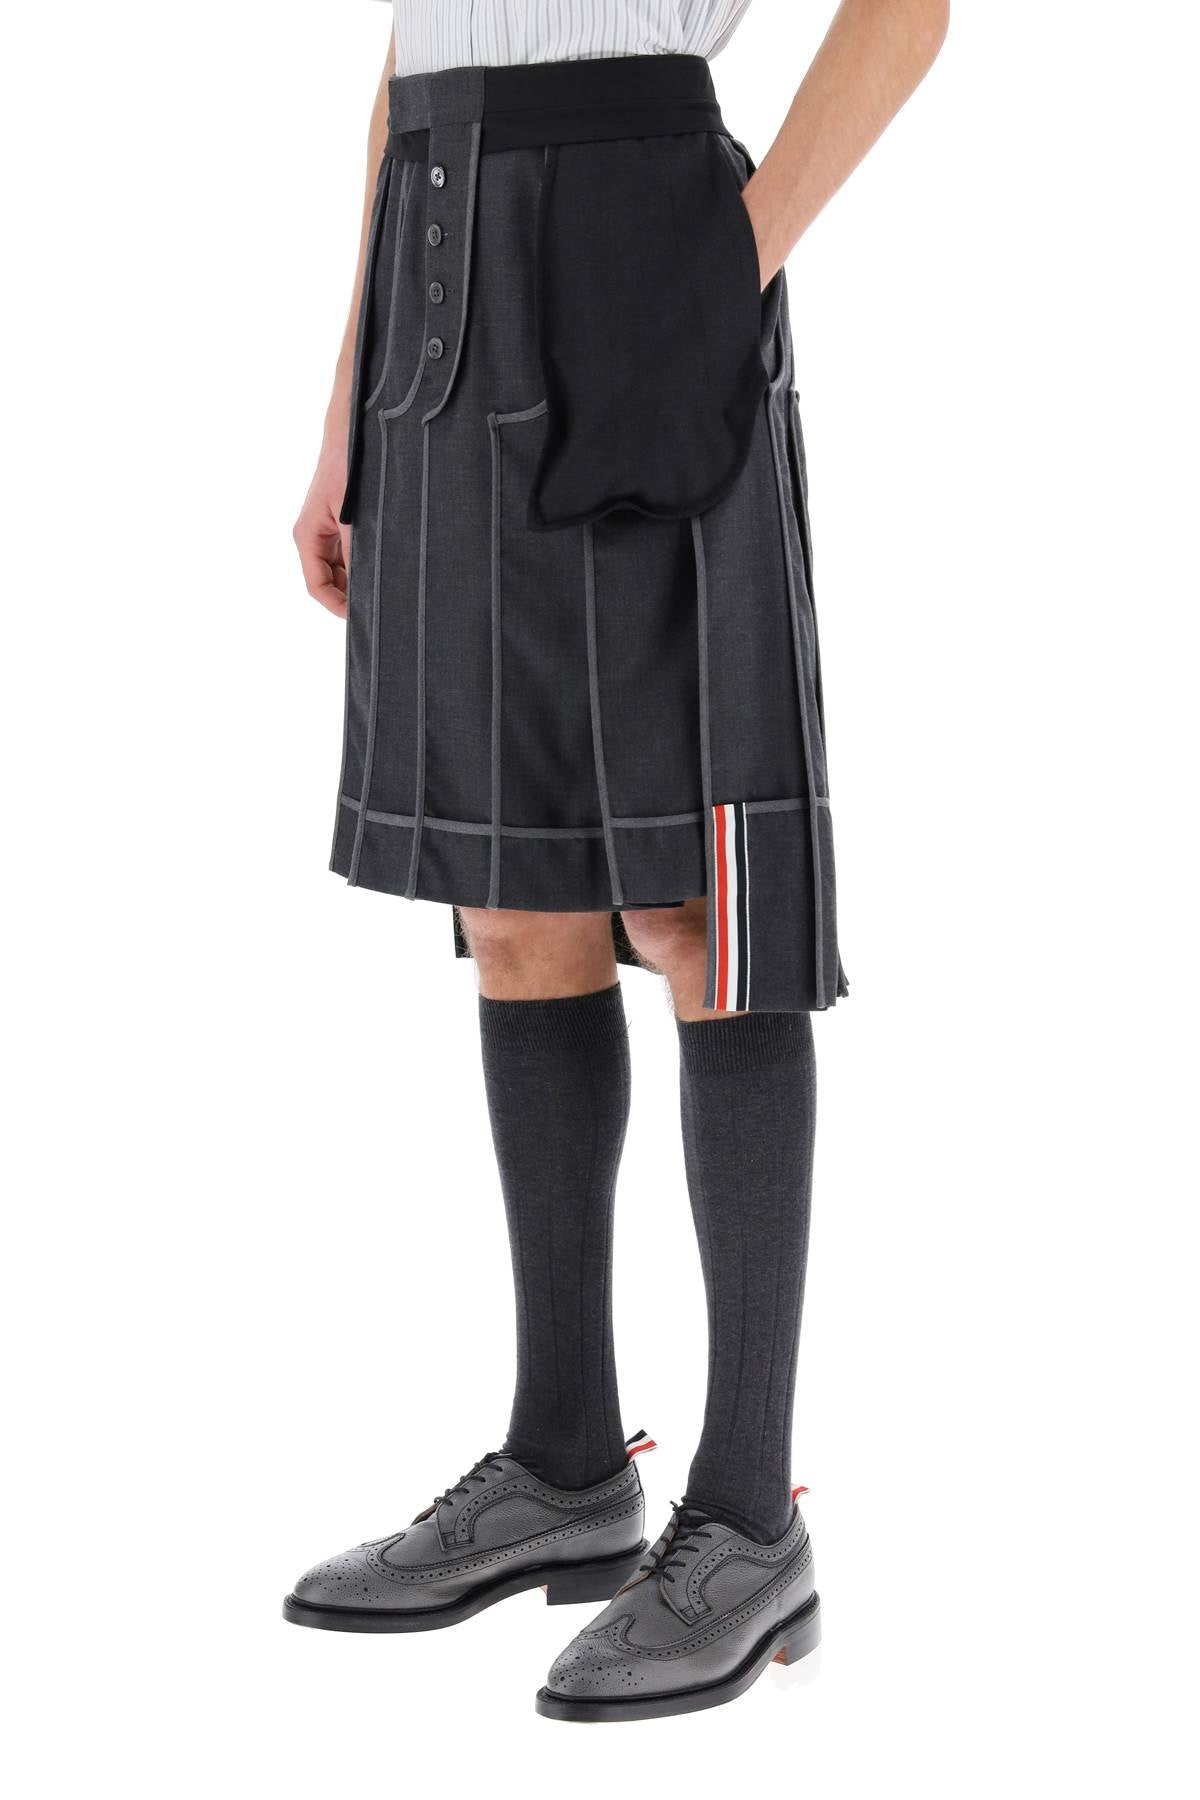 Thom Browne Thom browne inside-out pleated skirt